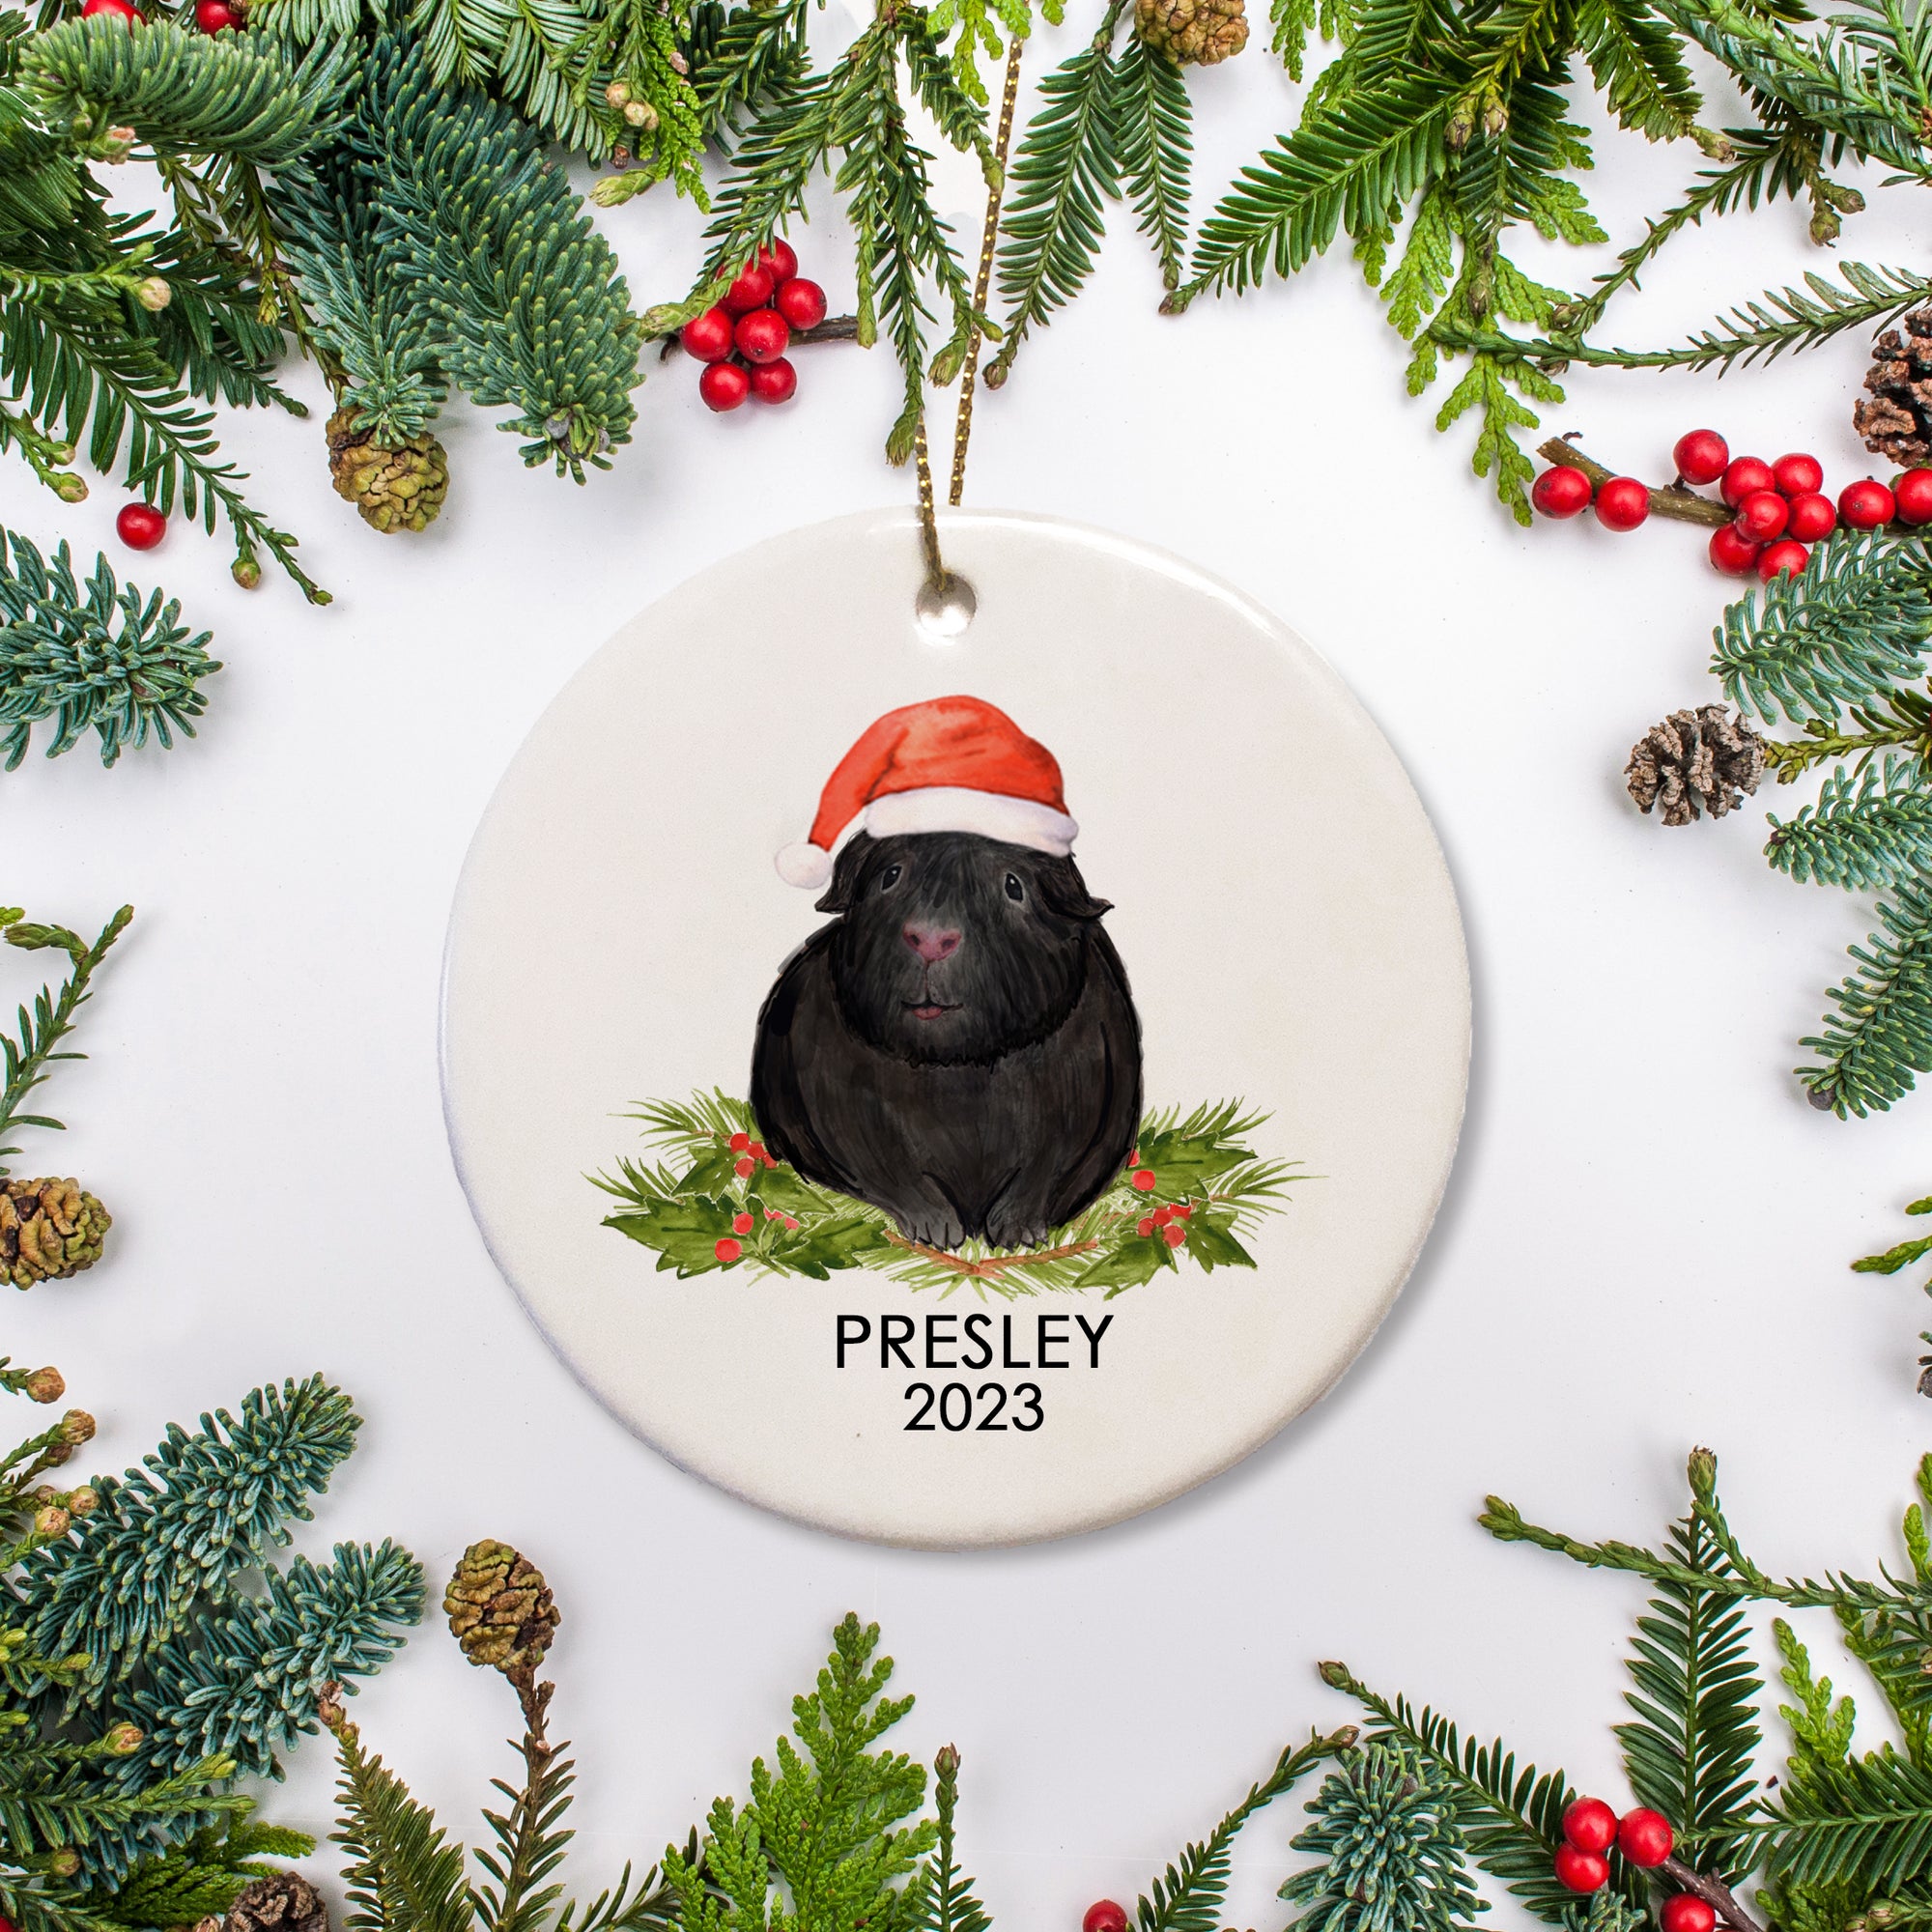 A special ornament for a special guinea pig. This is ceramic and includes a name and date for a  black guinea pig